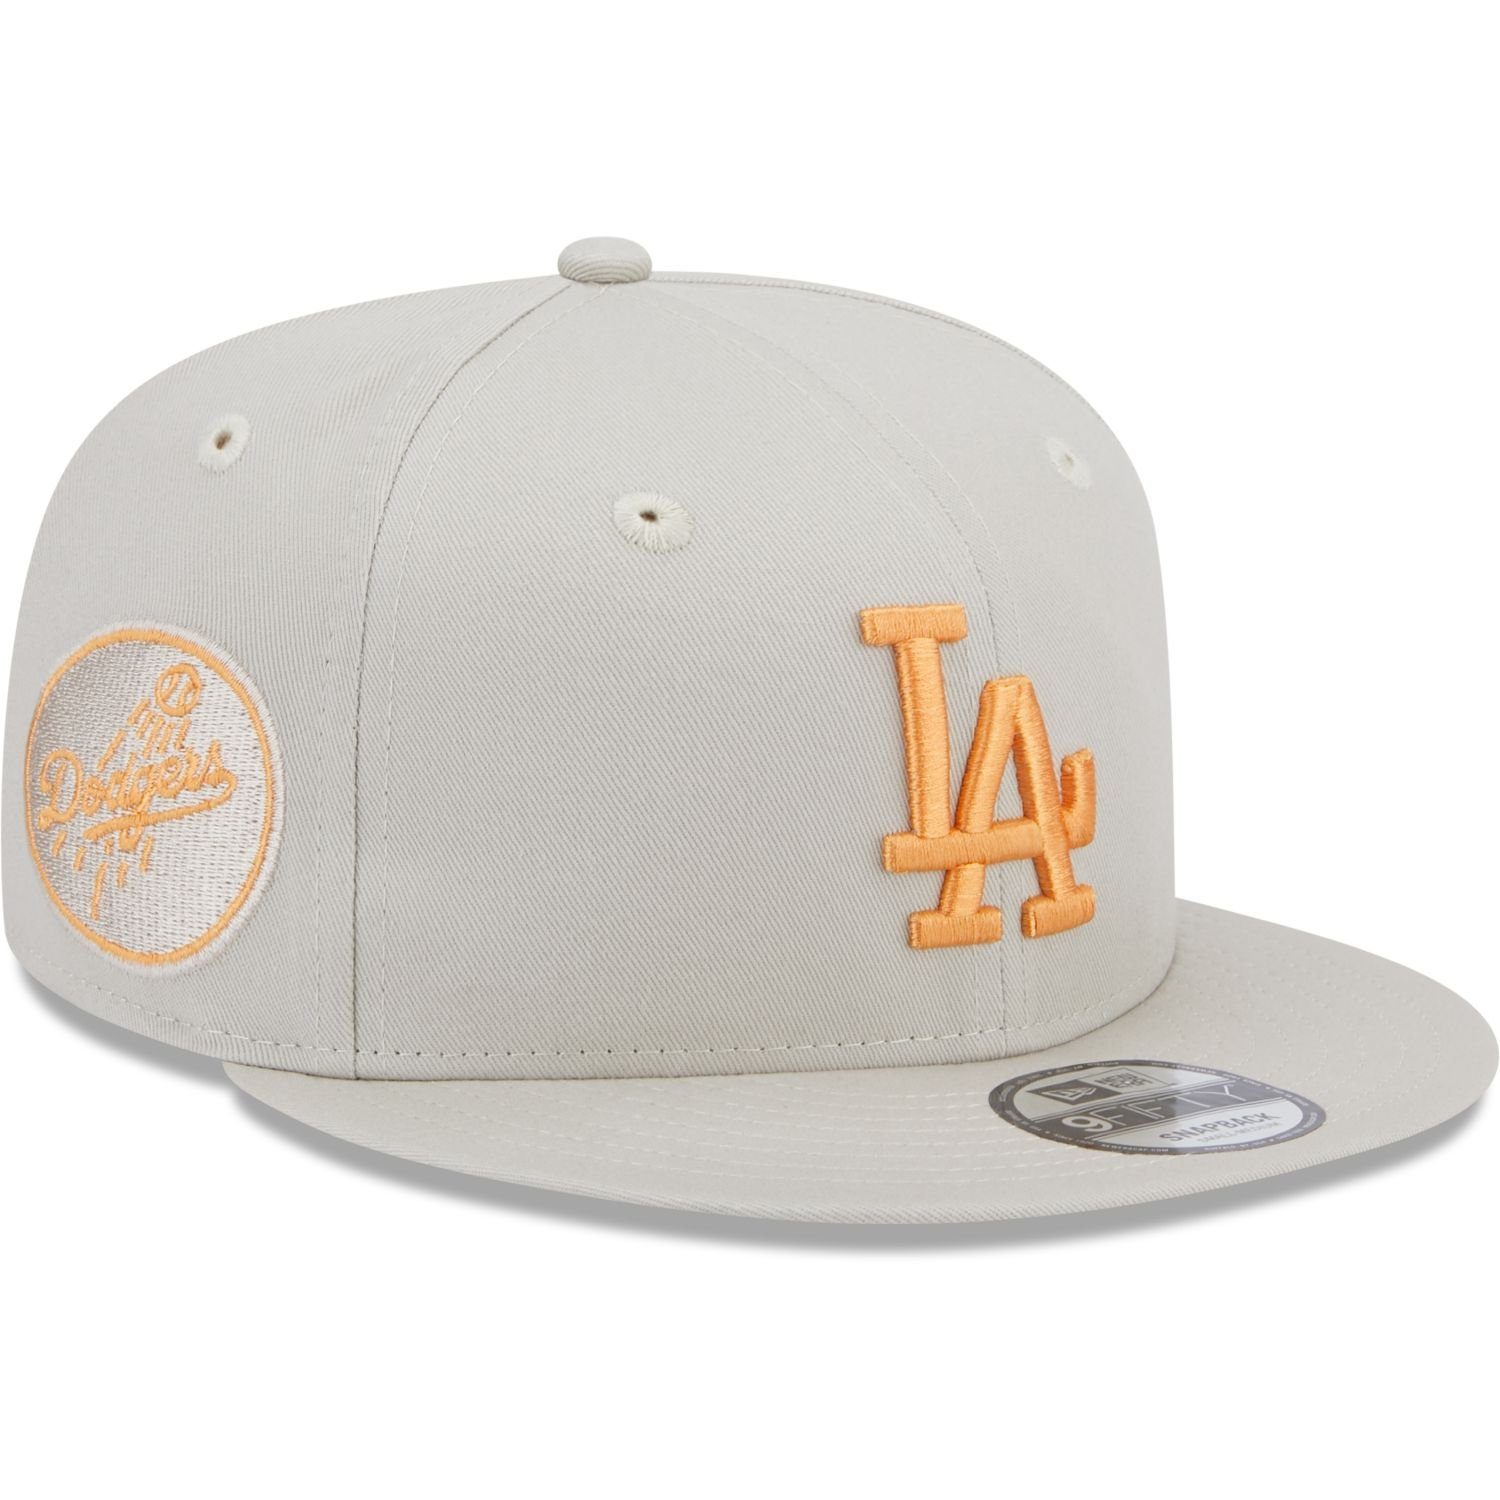 Dodgers Era Snapback SIDEPATCH Angeles Cap Los 9Fifty New